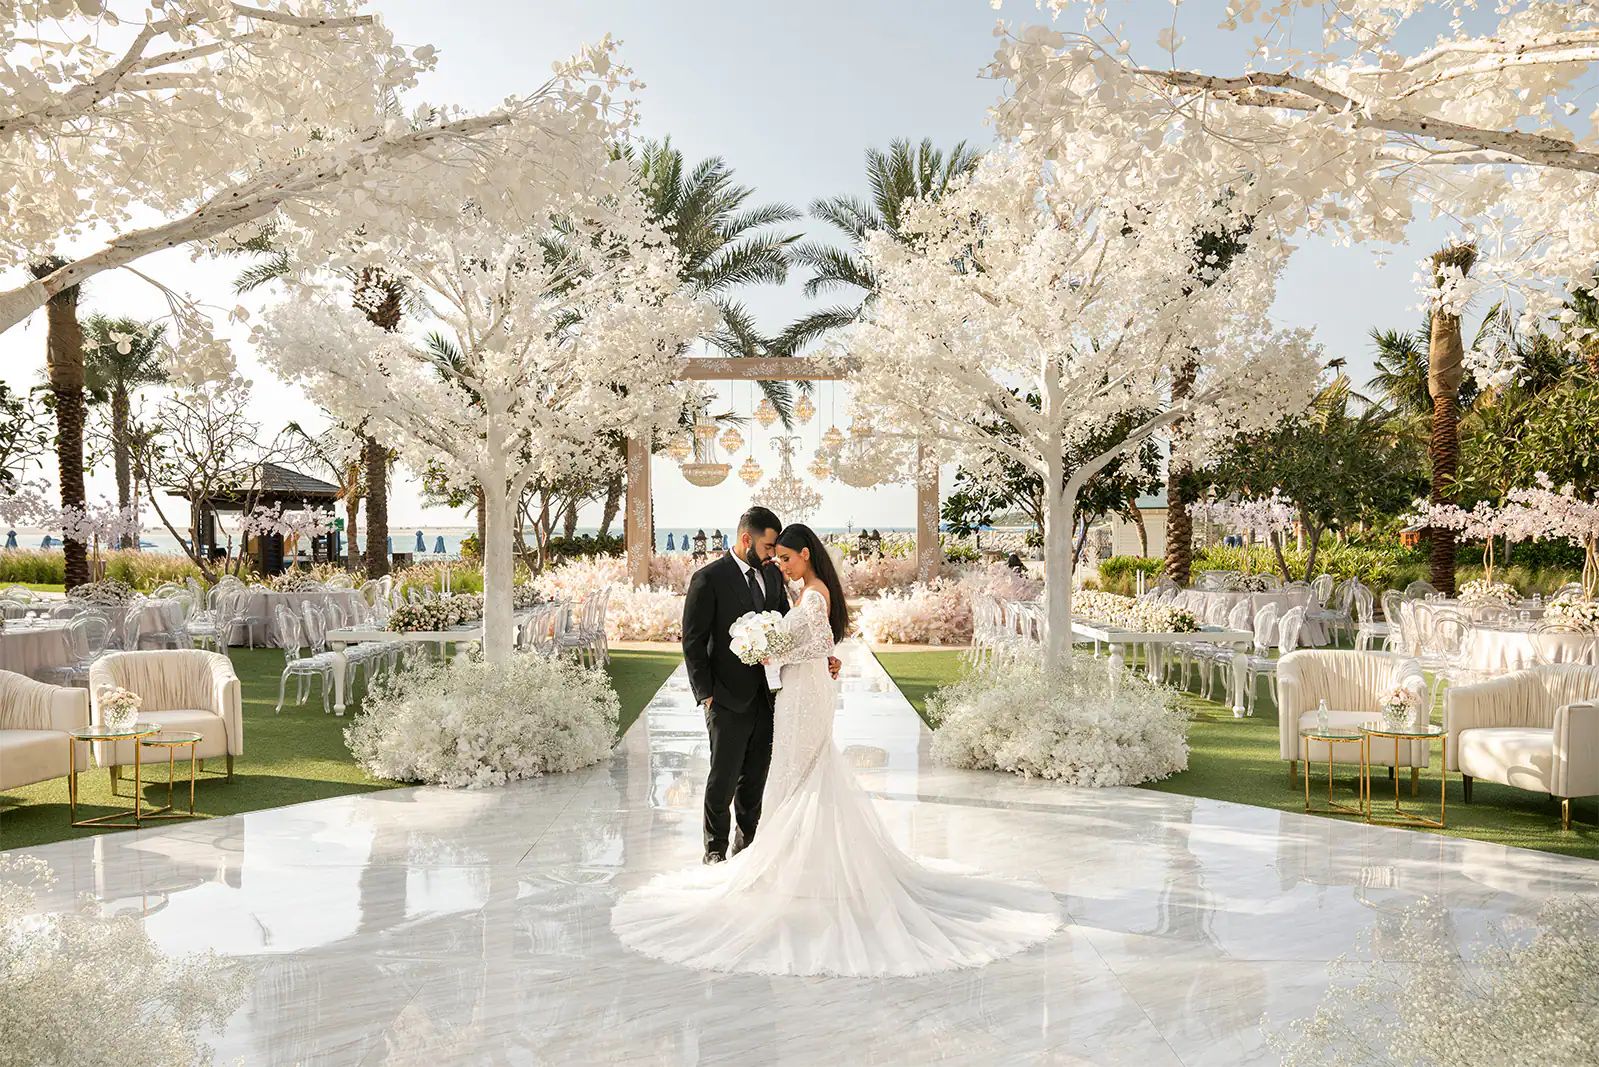 The importance of event planning for weddings in Dubai